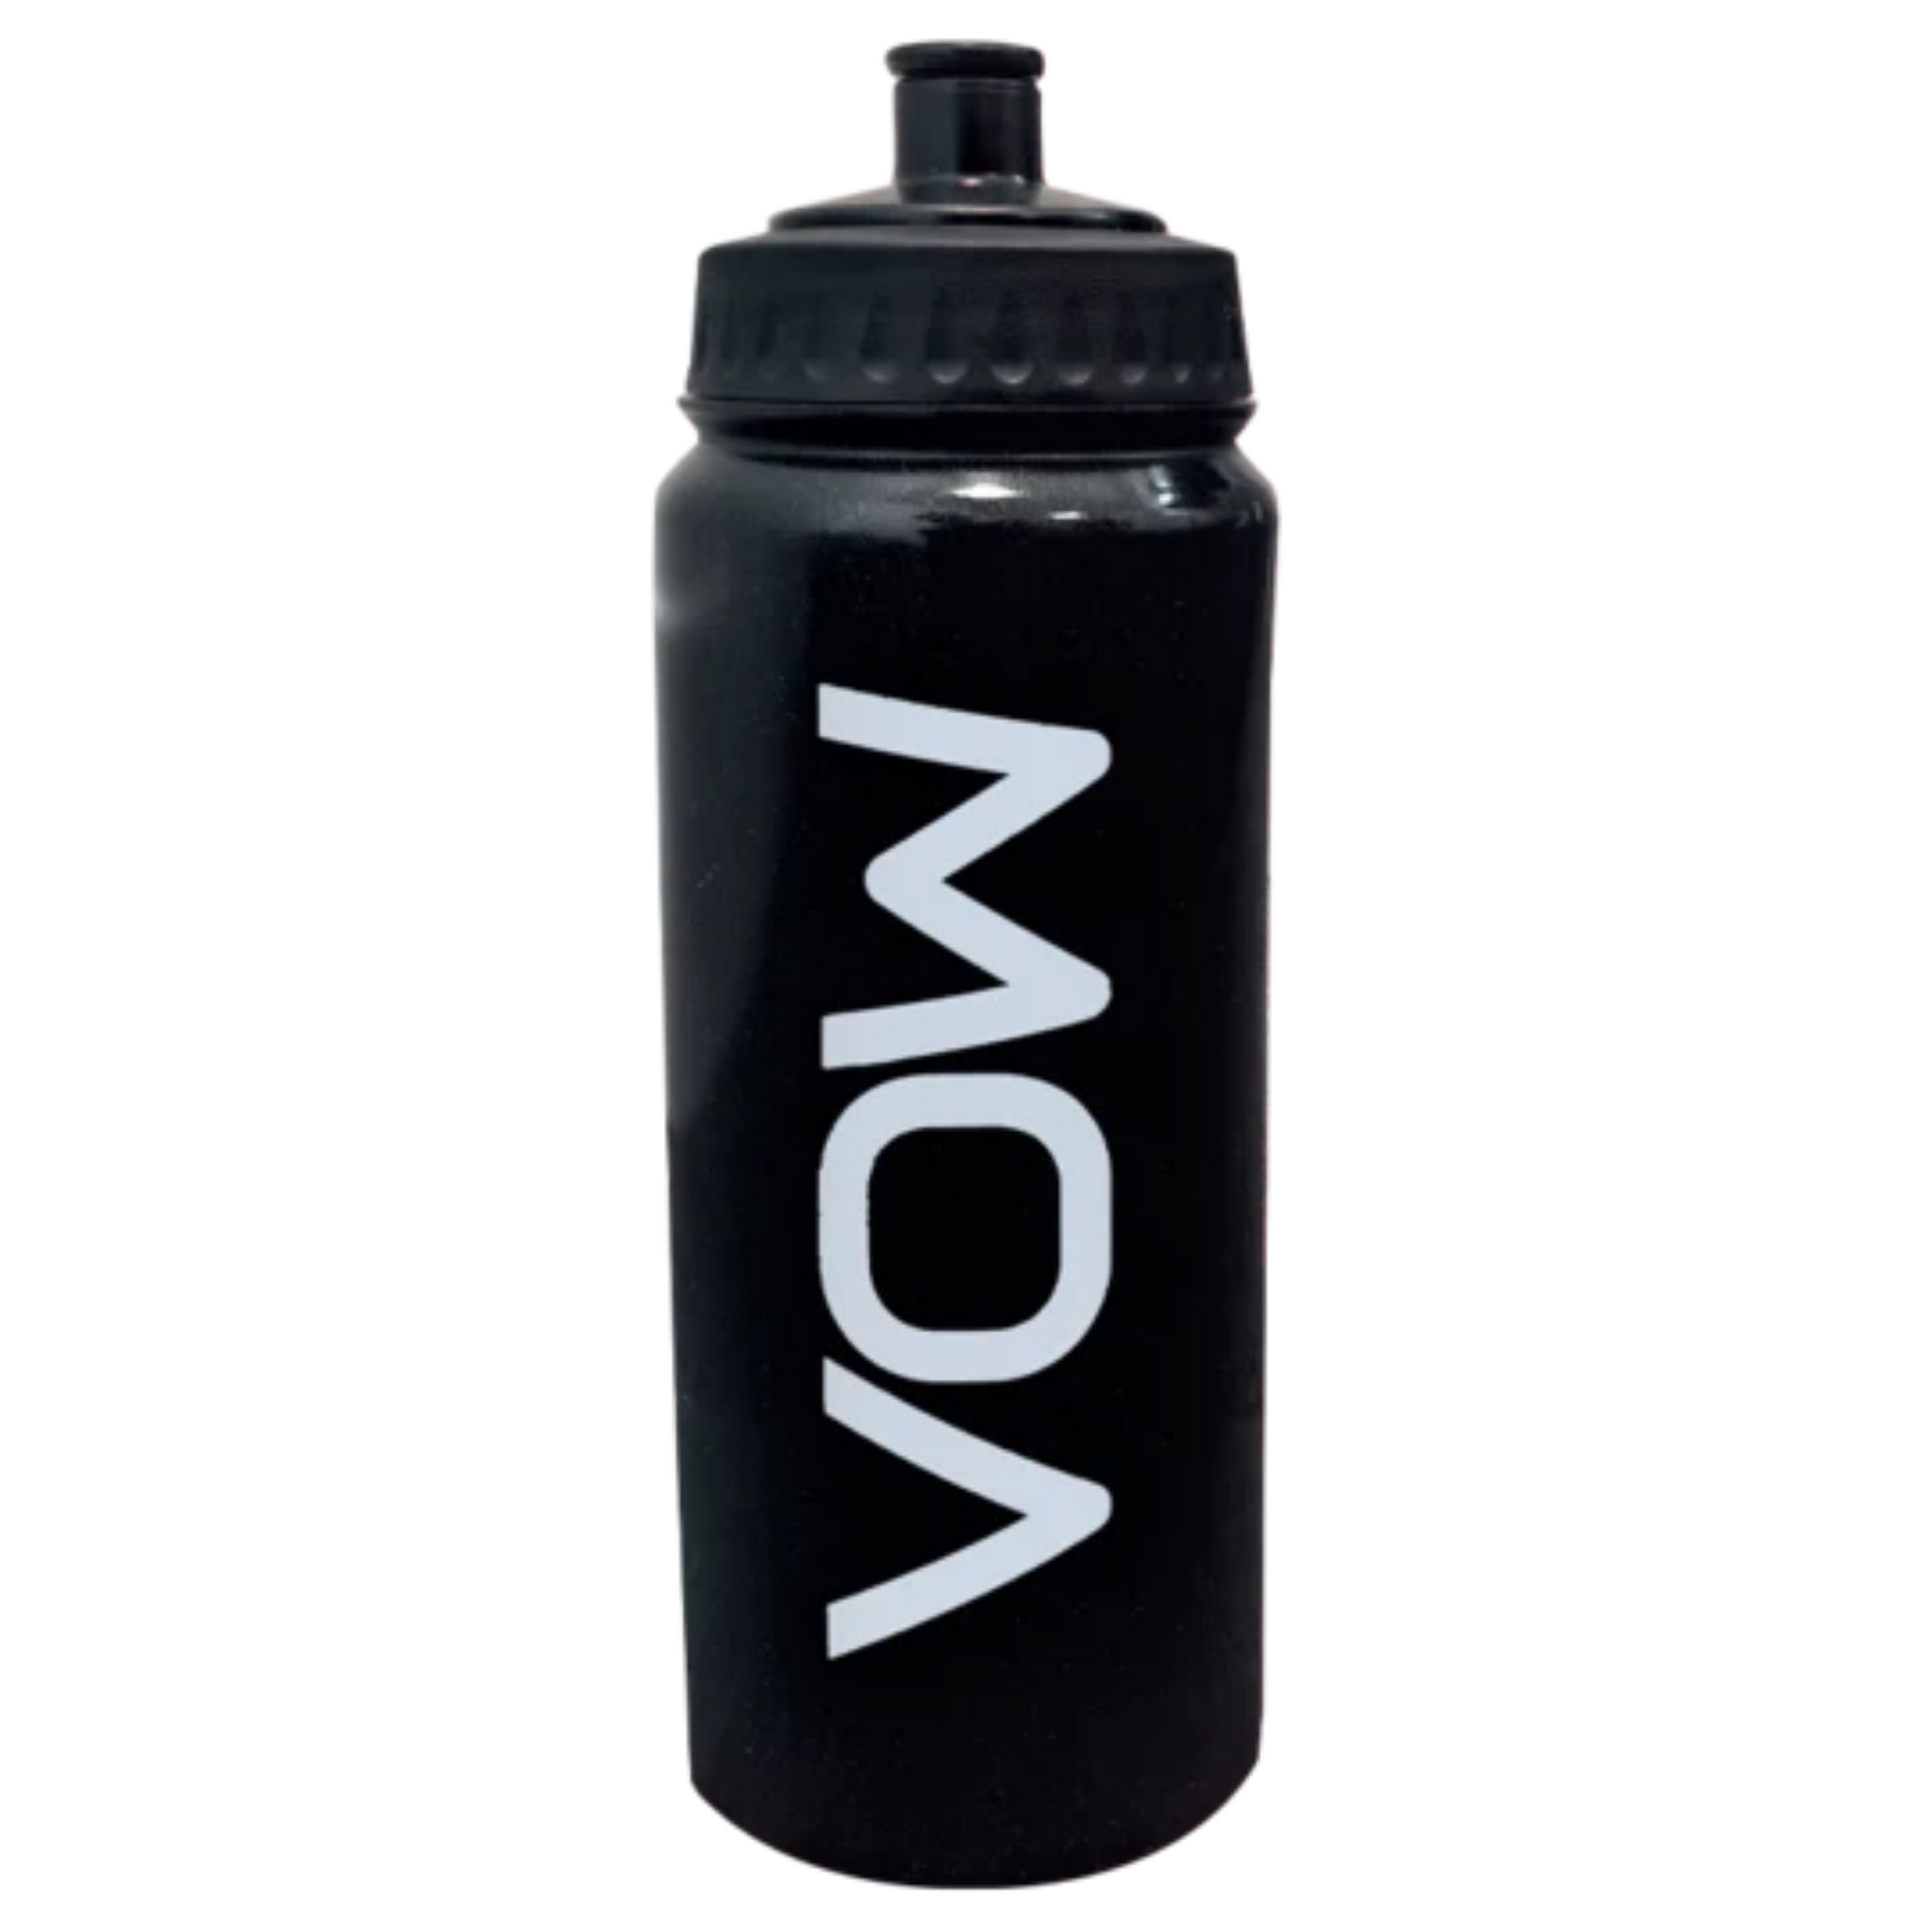 VOW 750ml Water Bottle Supplements Sports Simon Evans Physiotherapy